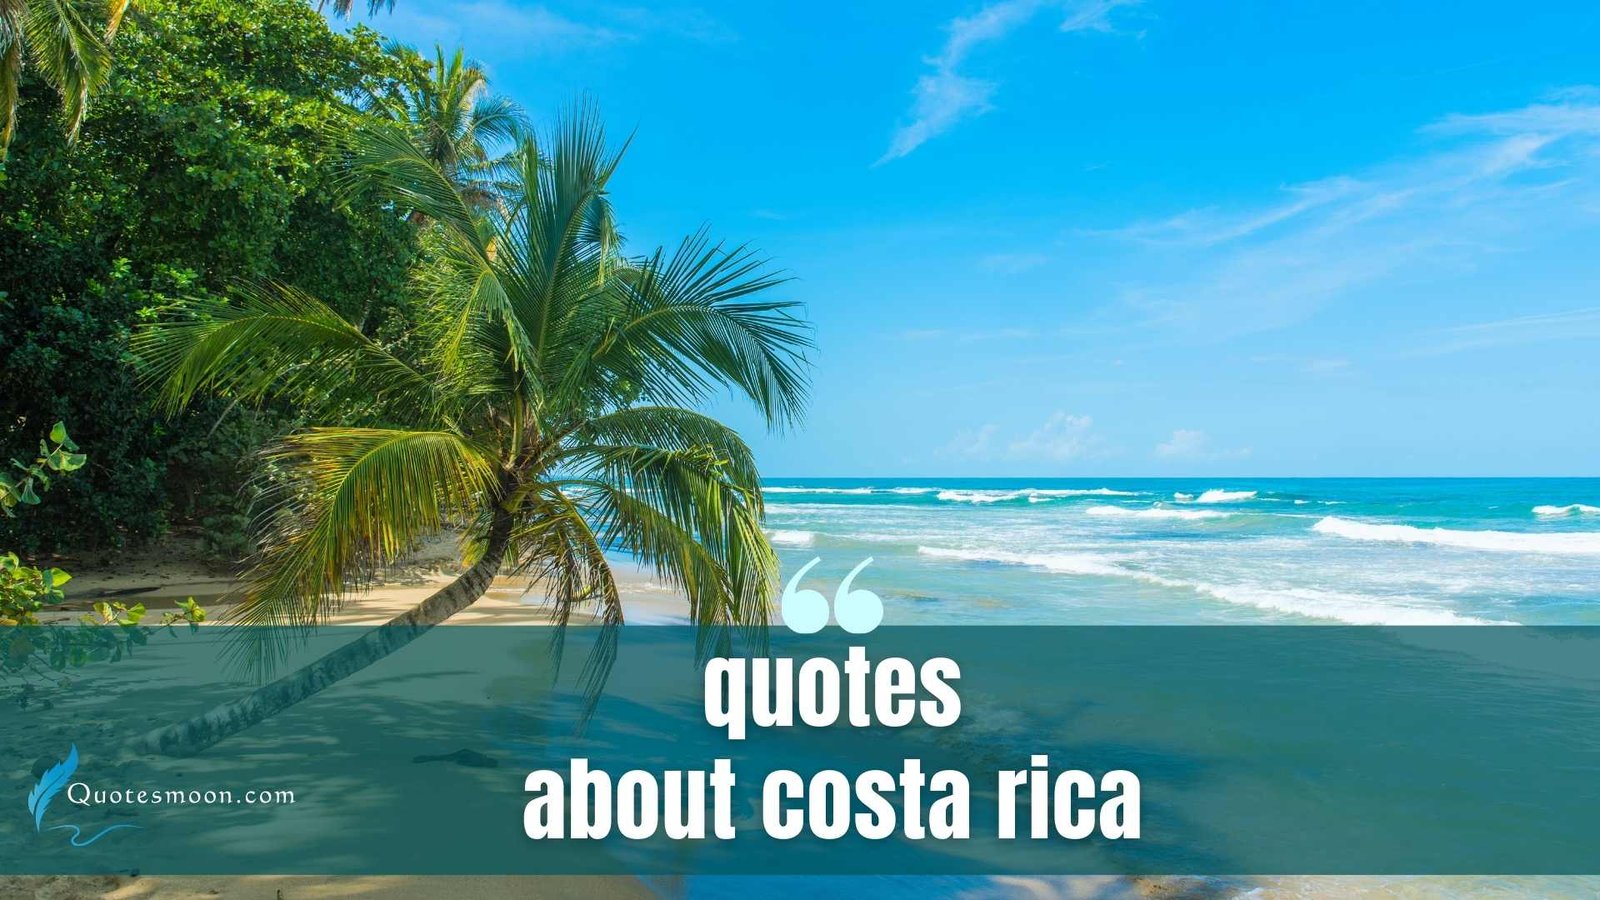 quotes about costa rica images